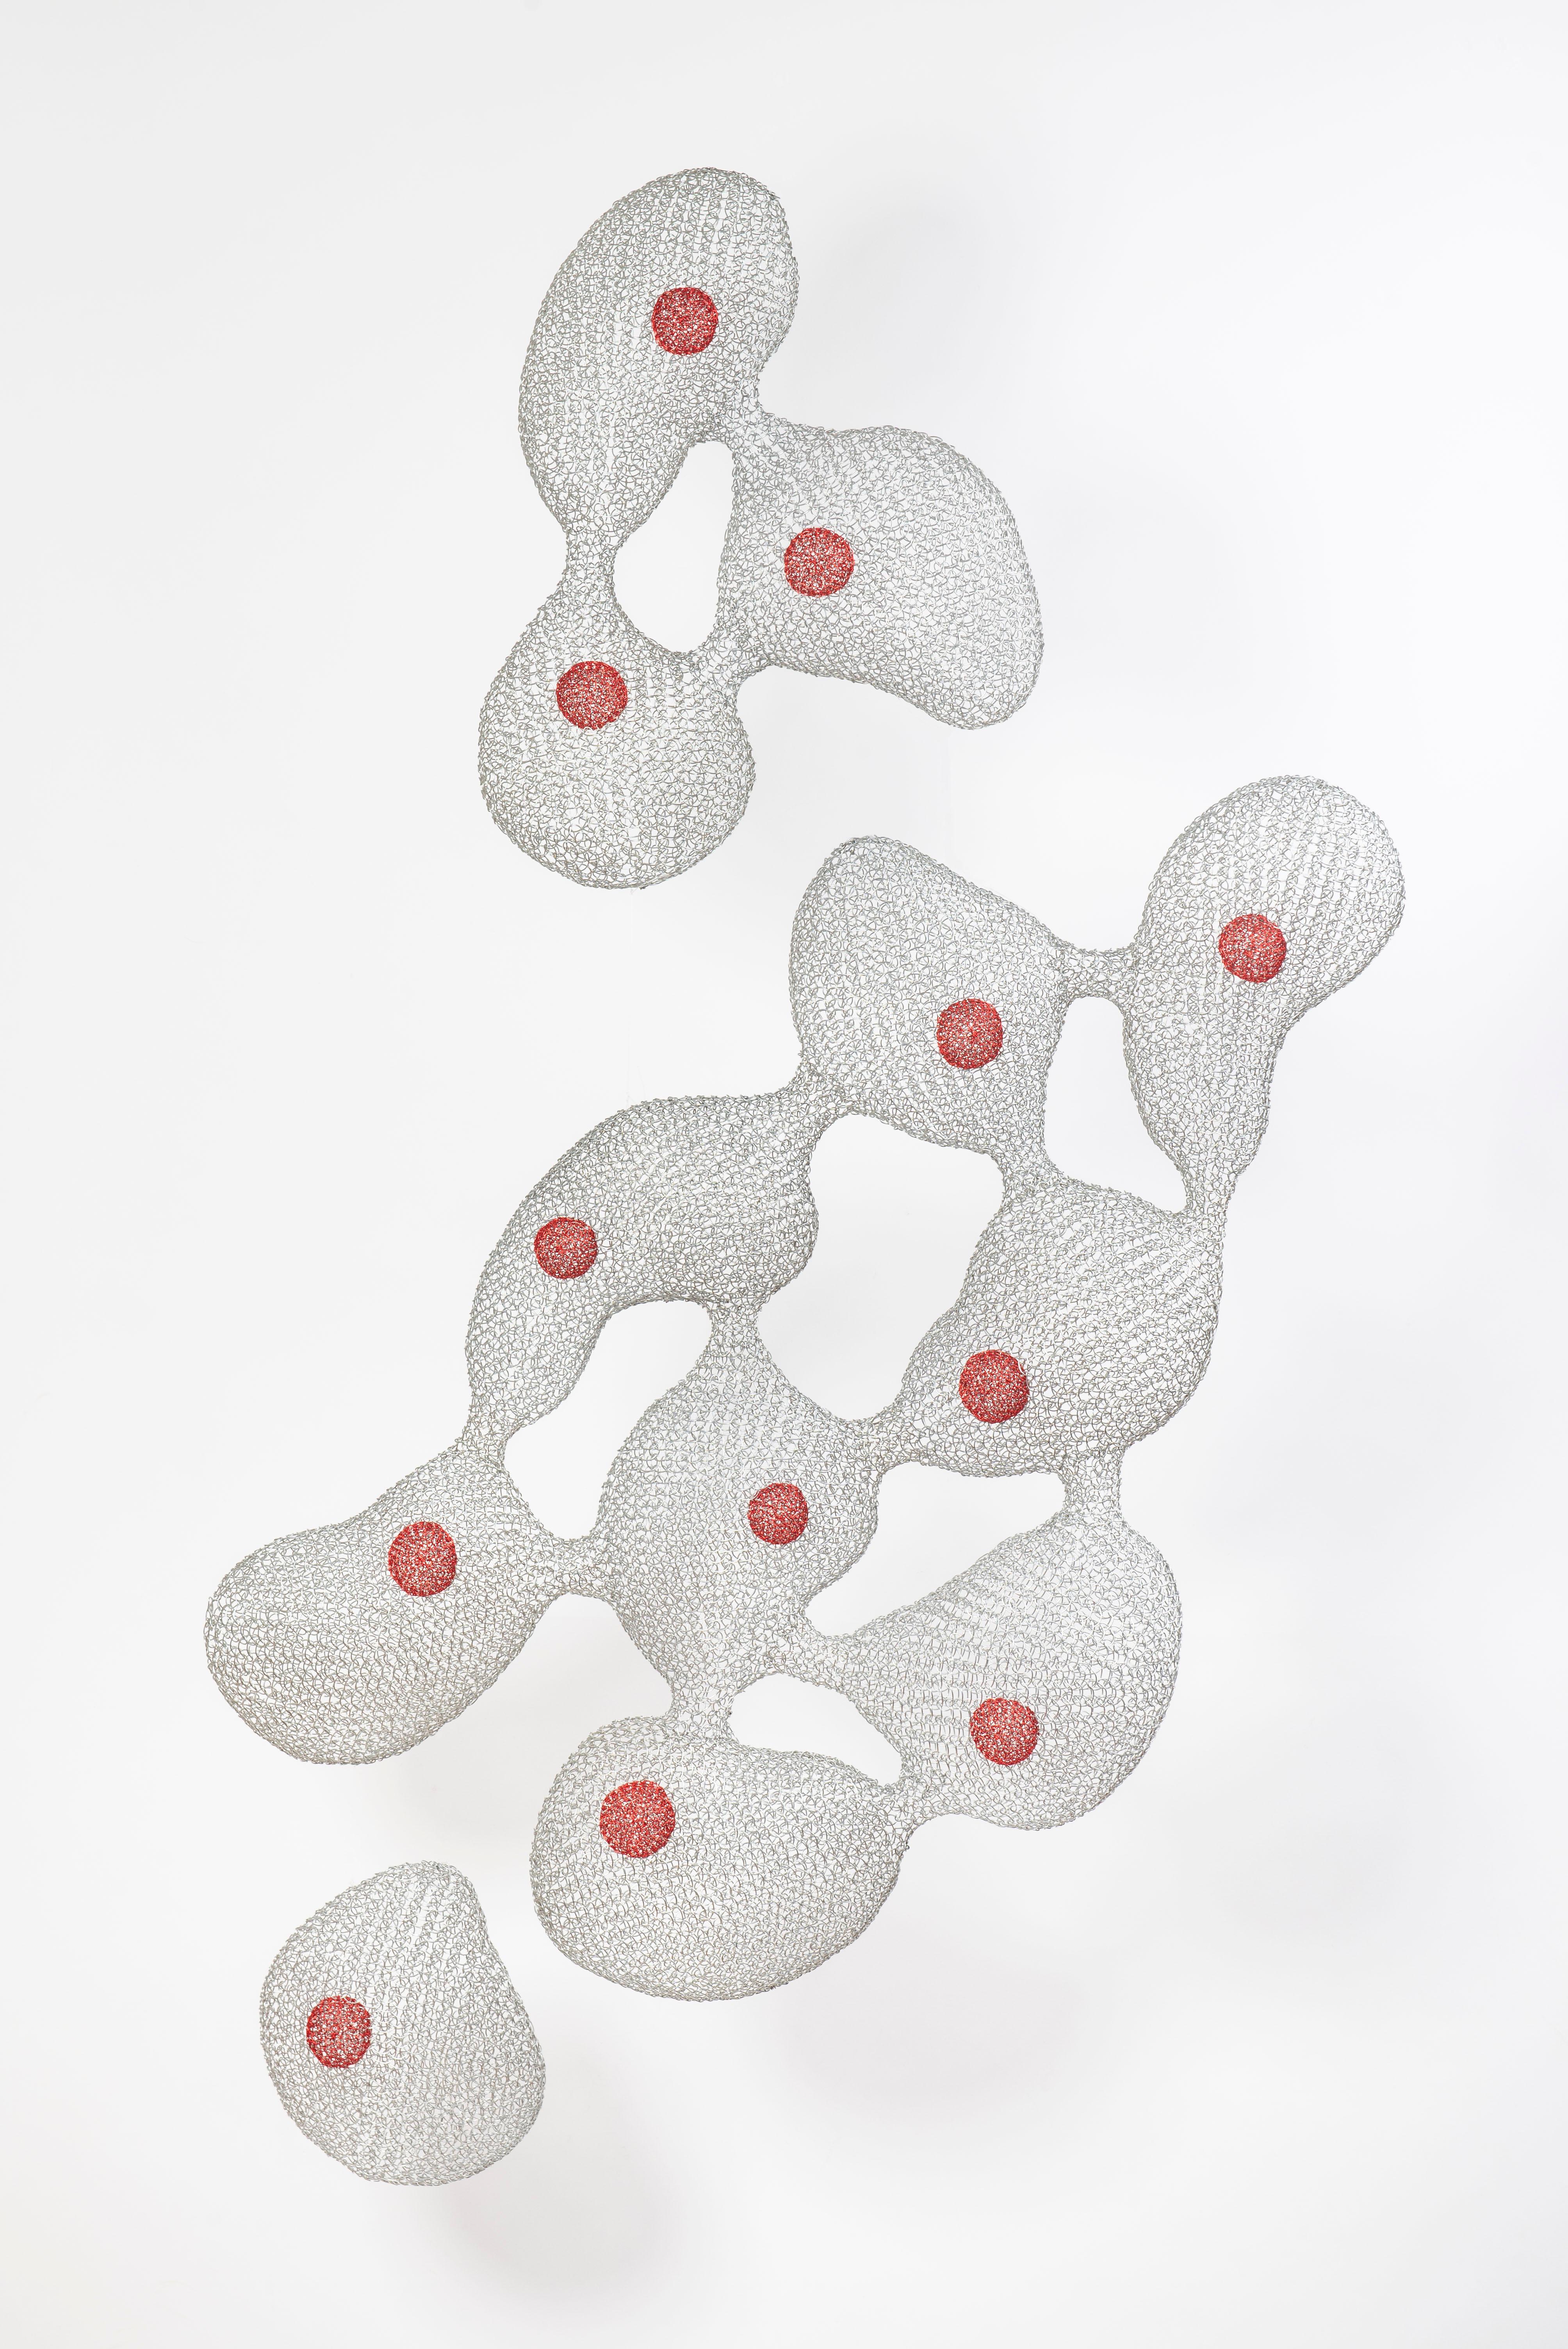 Delphine Grandvaux Abstract Sculpture - "Expansion", Hand-Made Metallic Airy Figurative Abtract Grey Red Mesh Sculpture